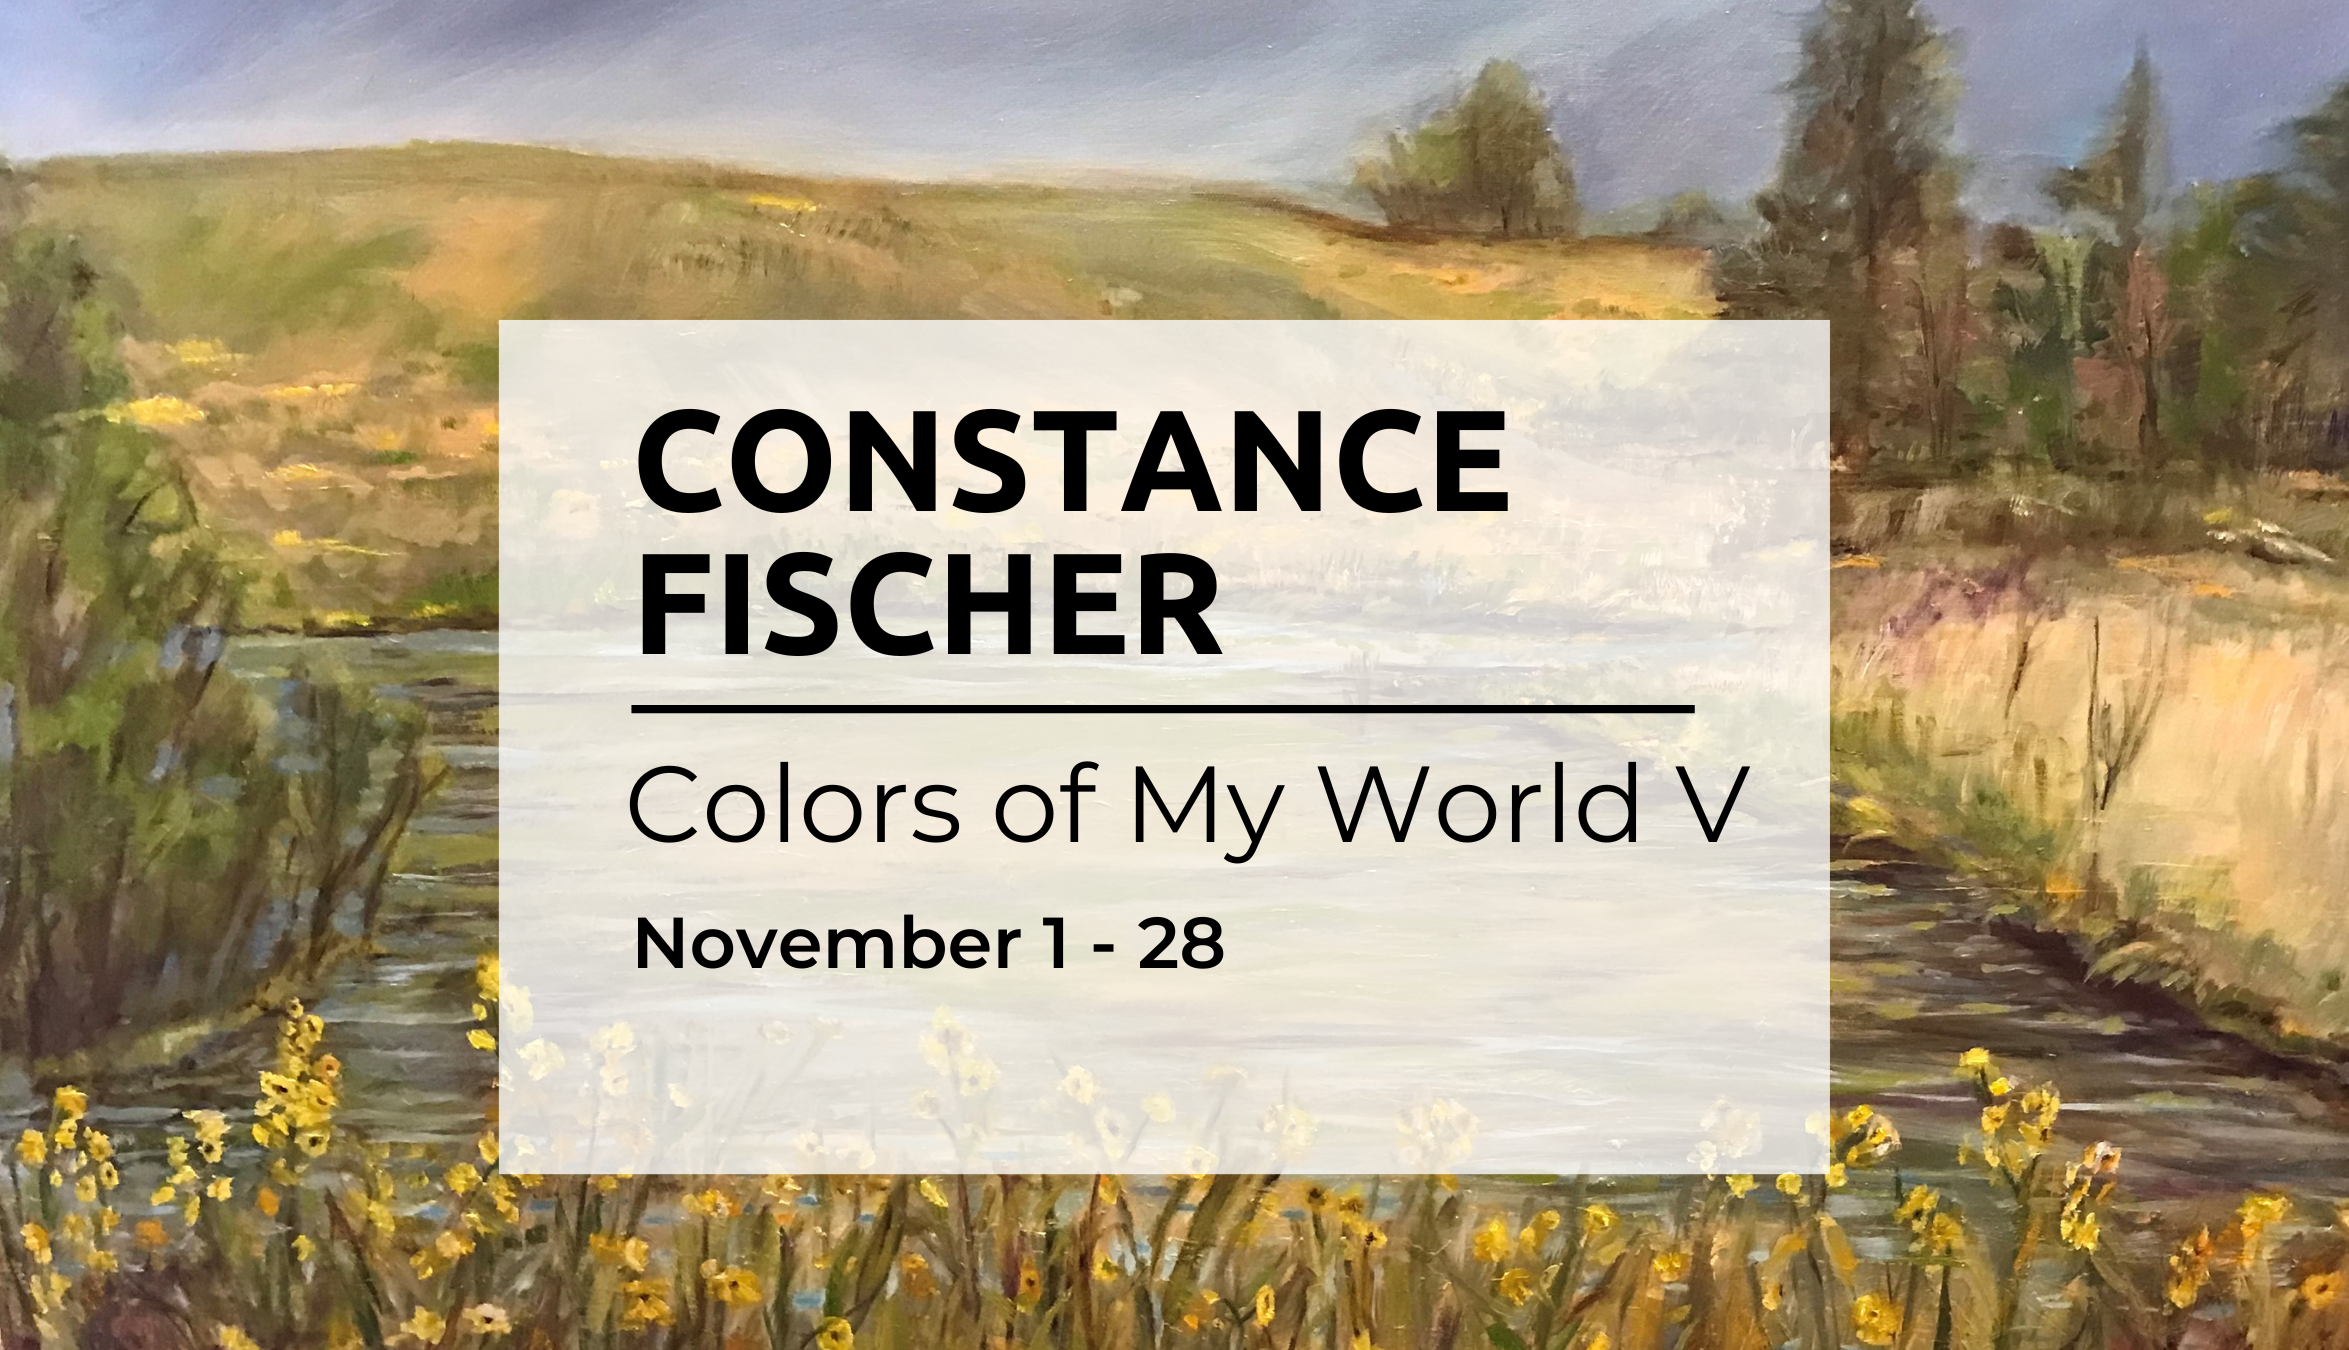 On Exhibit: "Colors of My World V"